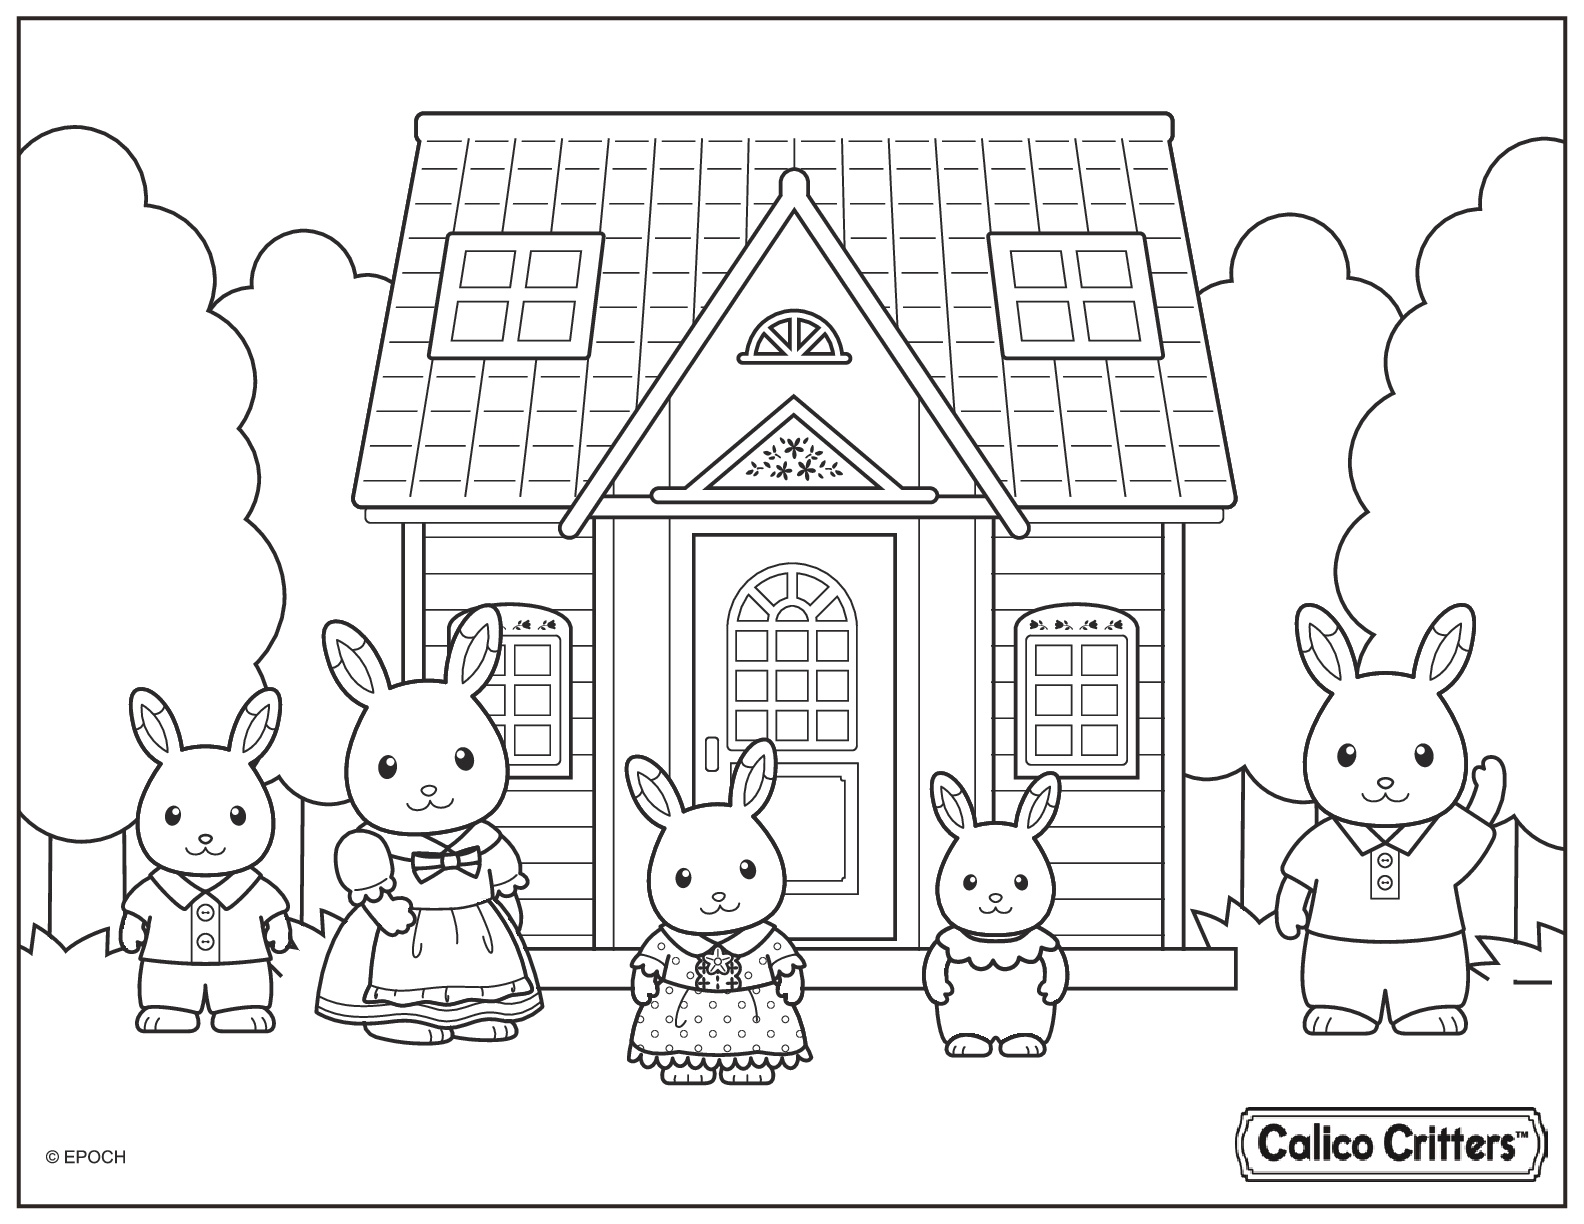 Calico Critters Cute Family